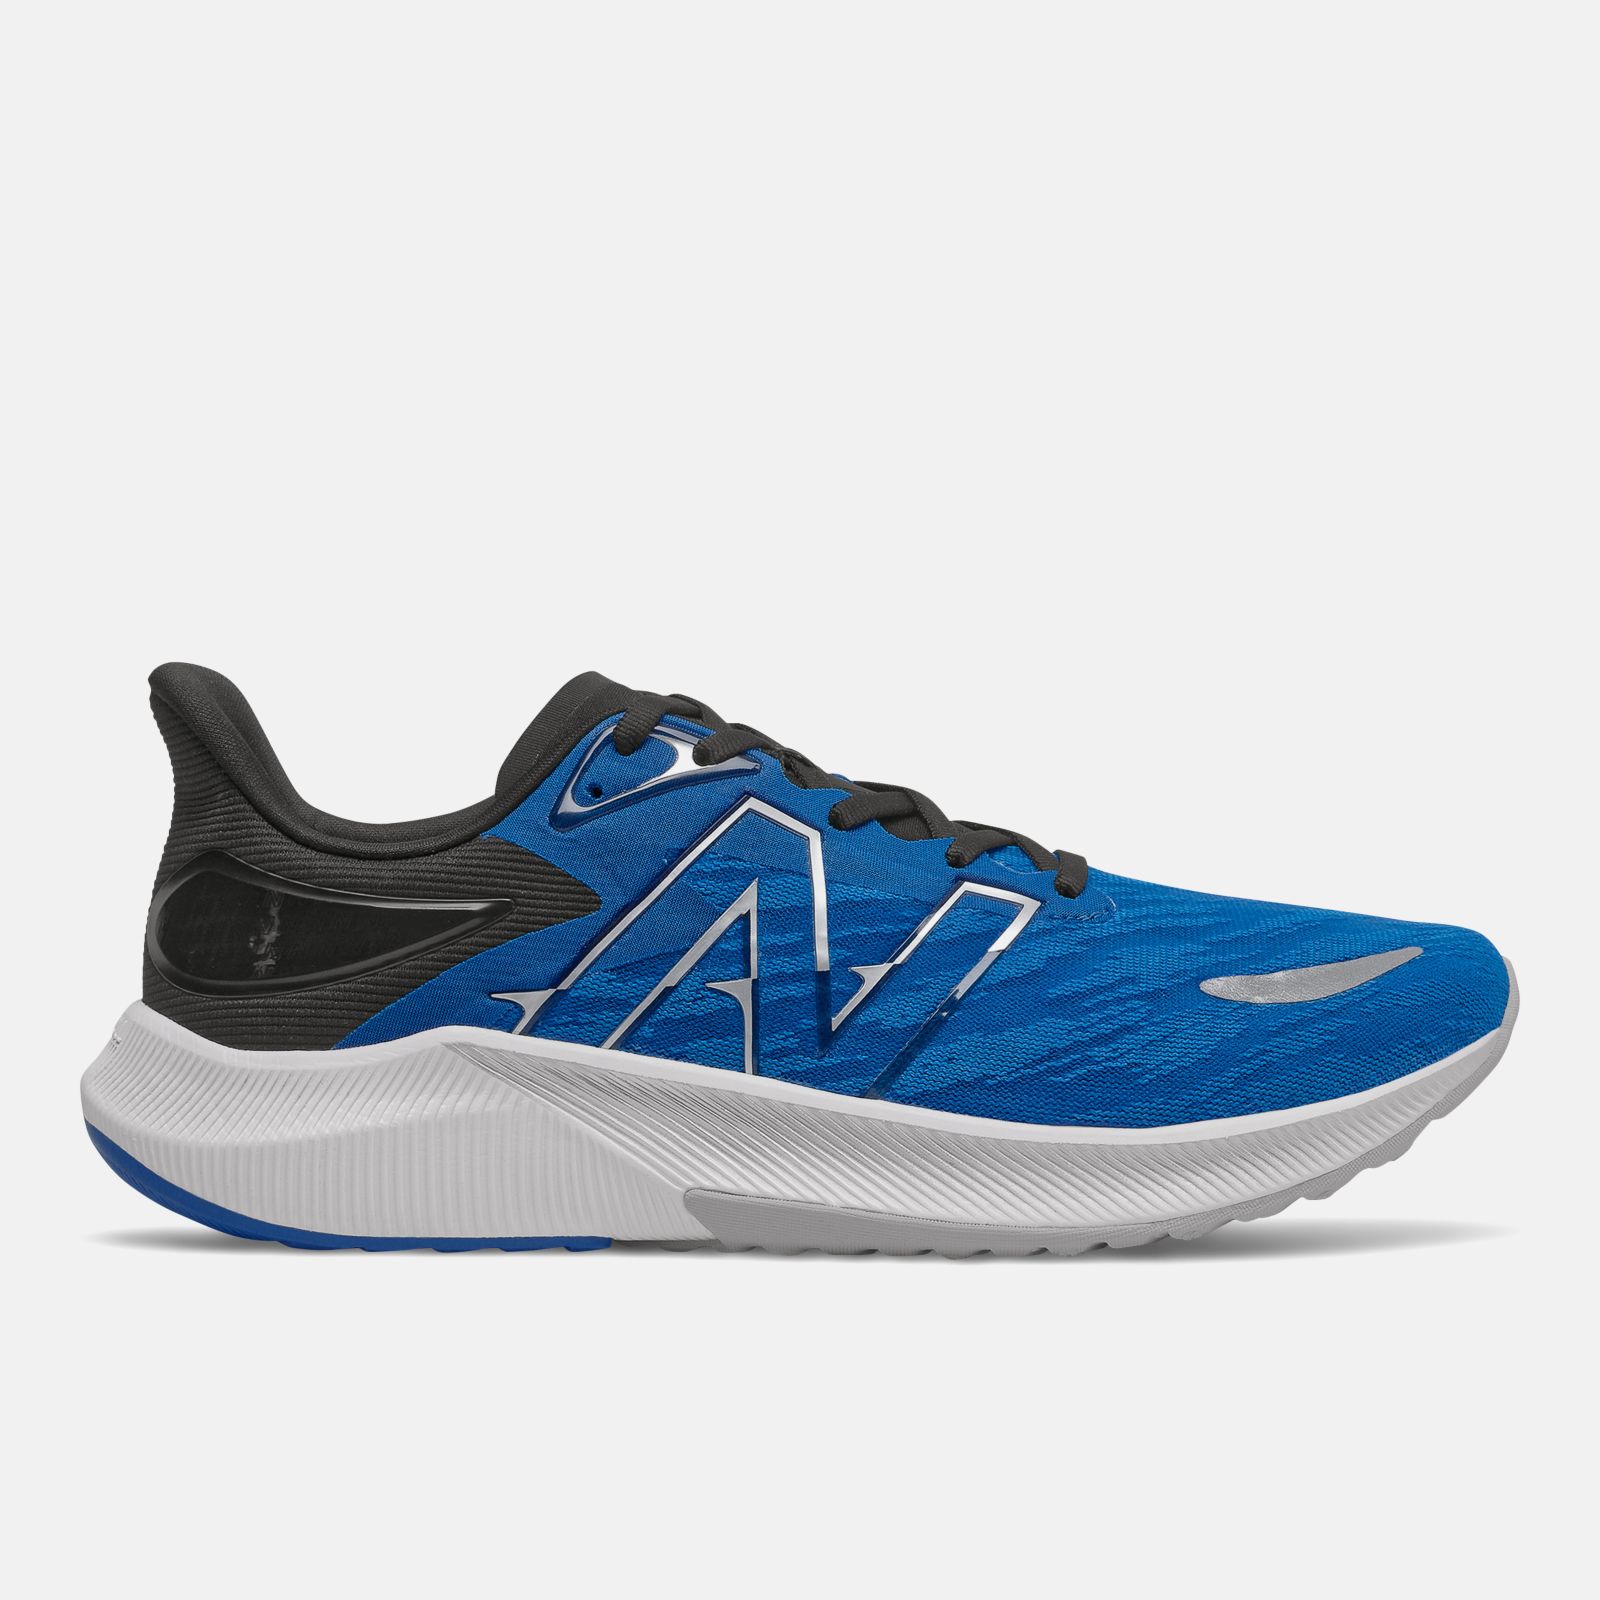 New Balance FuelCell Propel v3, Helium, swatch